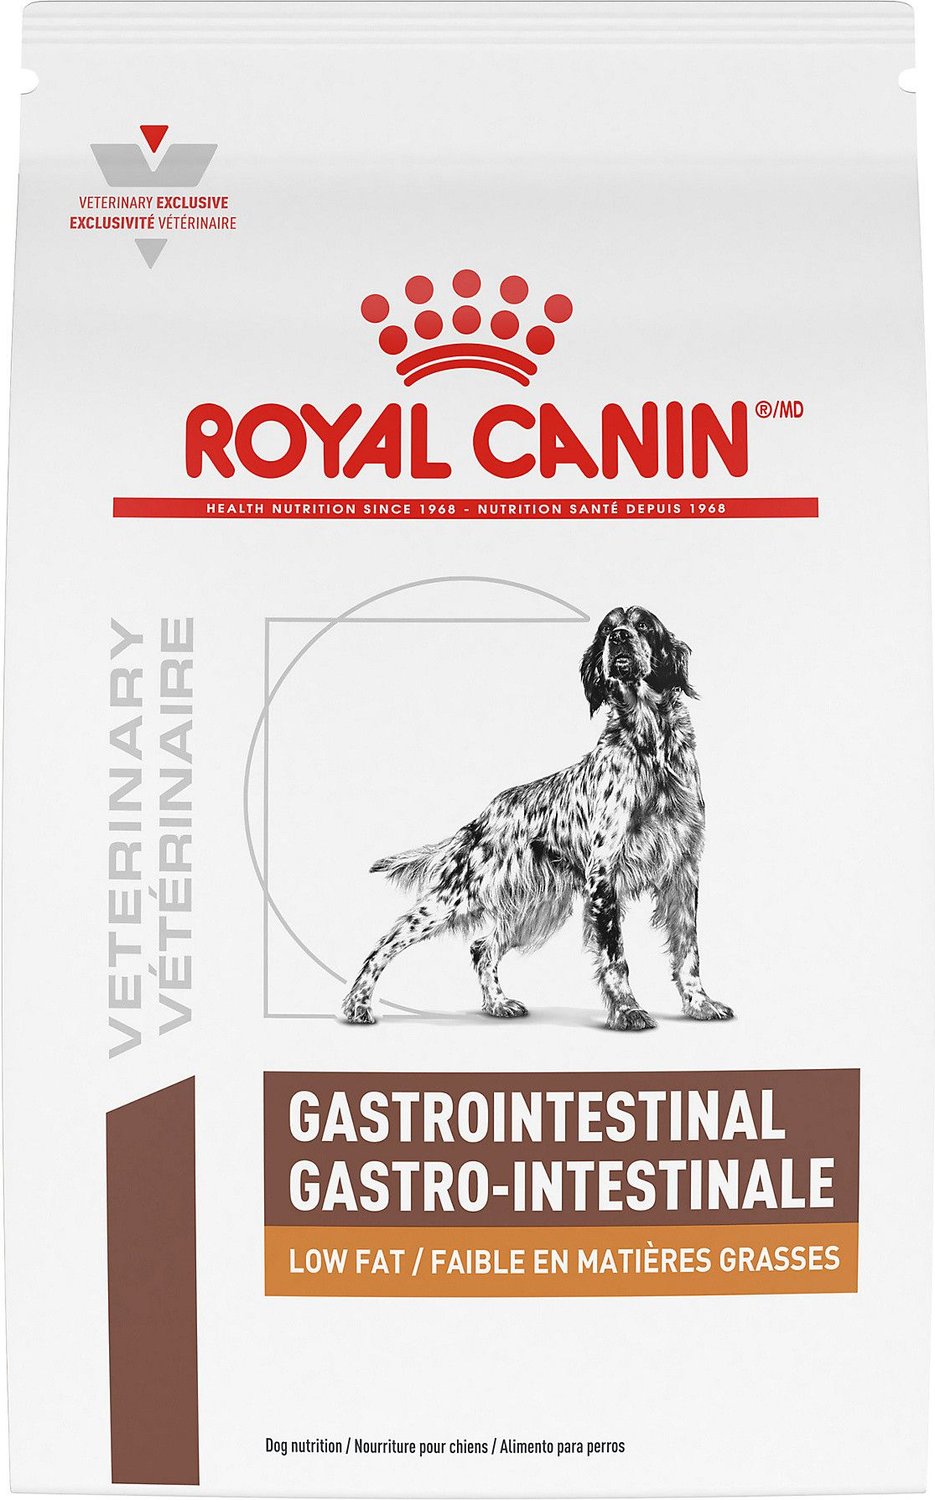 behuizing Carrière Maryanne Jones ROYAL CANIN VETERINARY DIET Gastrointestinal Low Fat Dry Dog Food, 17.6-lb  bag - Chewy.com